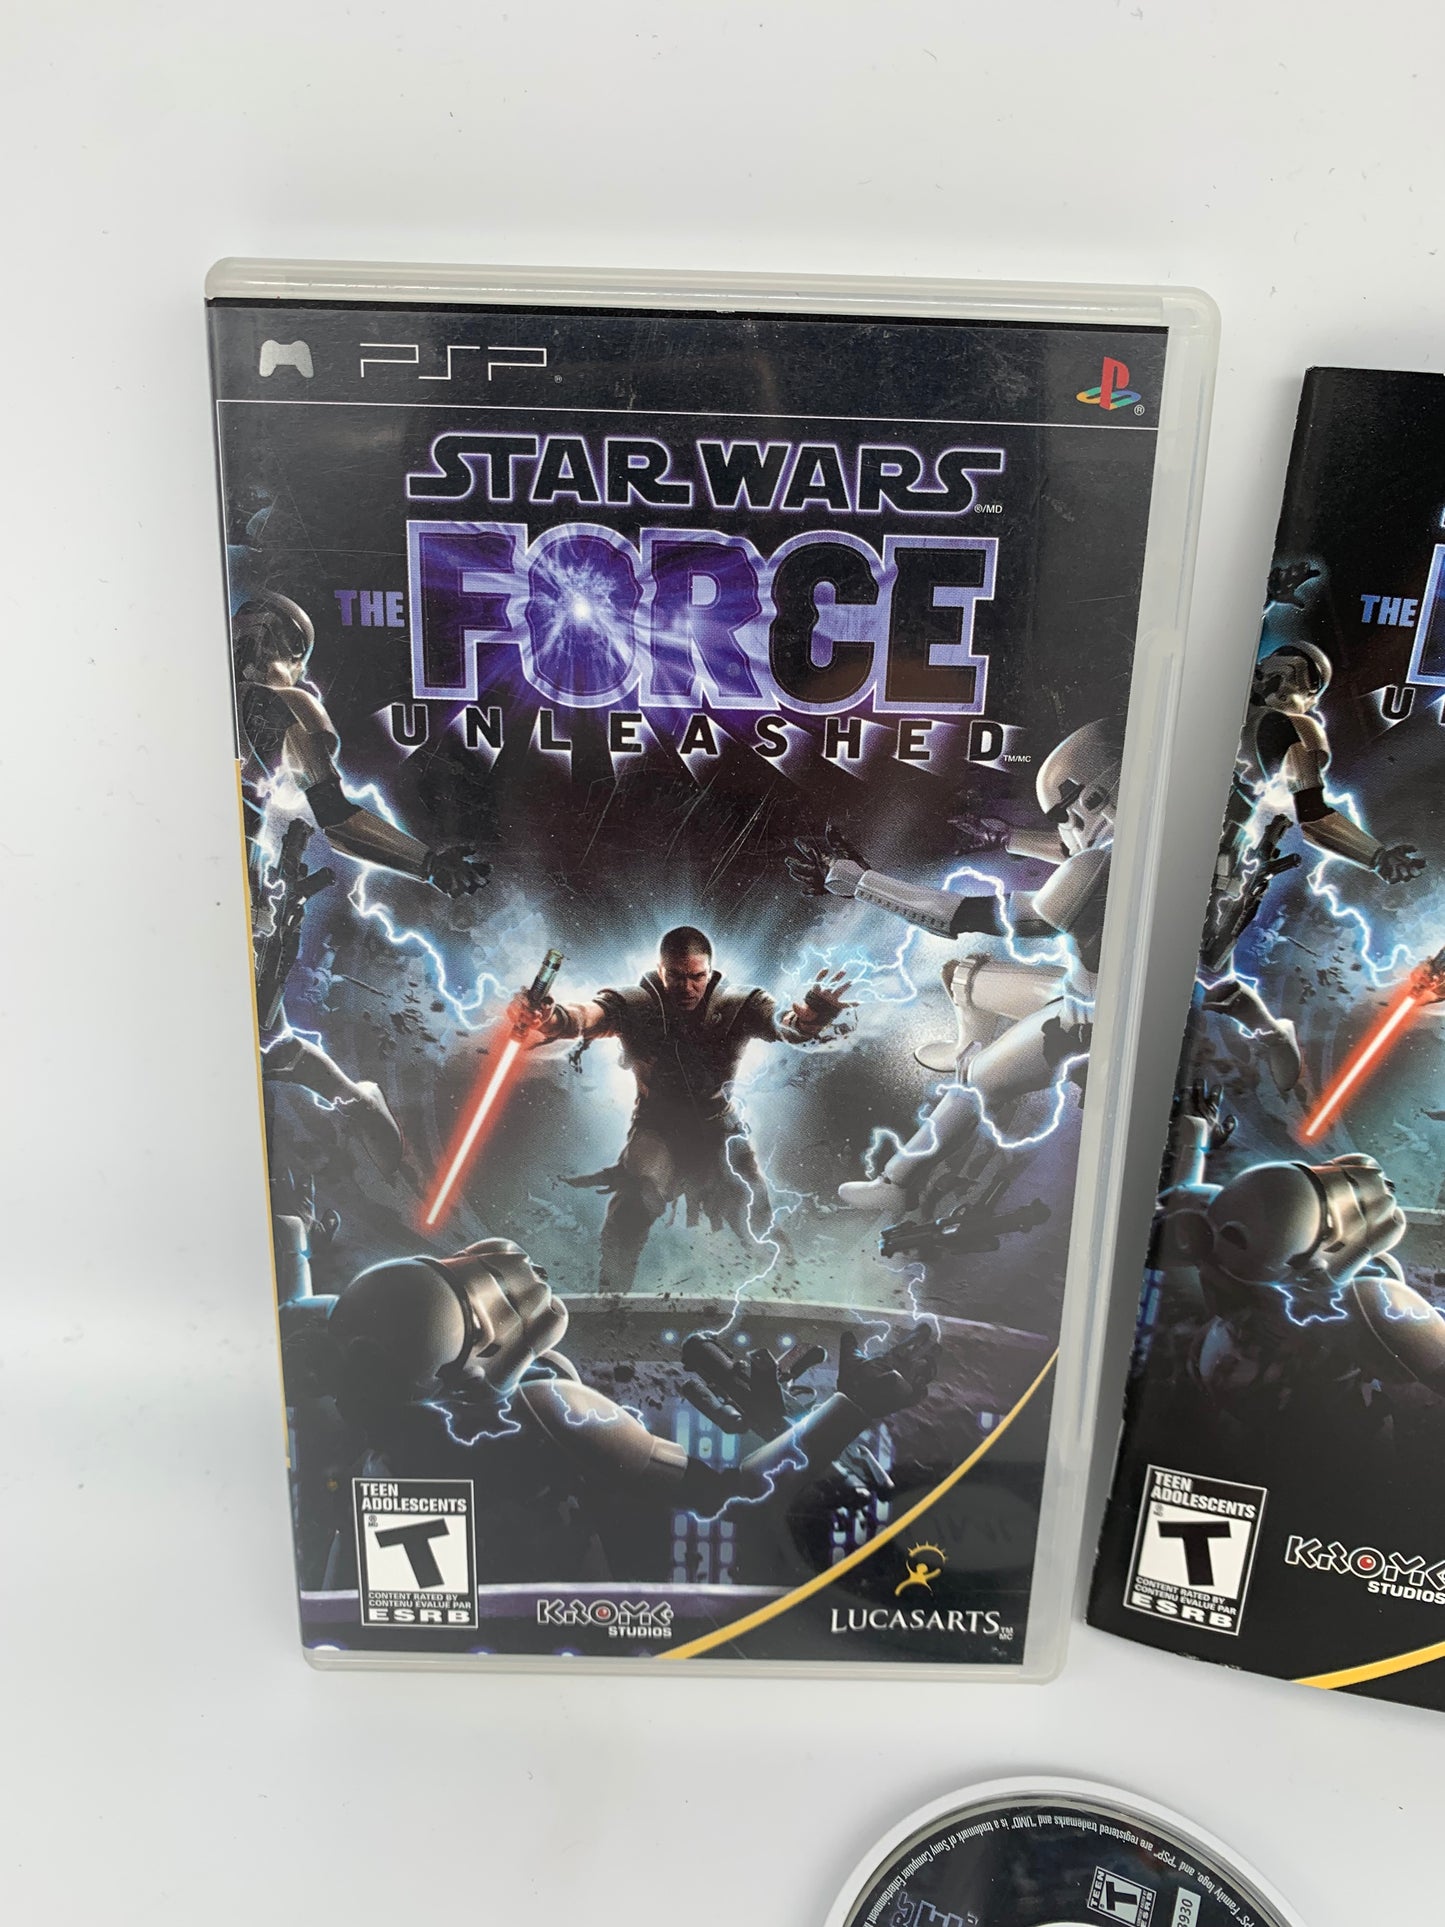 SONY PLAYSTATiON PORTABLE [PSP] | STAR WARS THE FORCE UNLEASHED